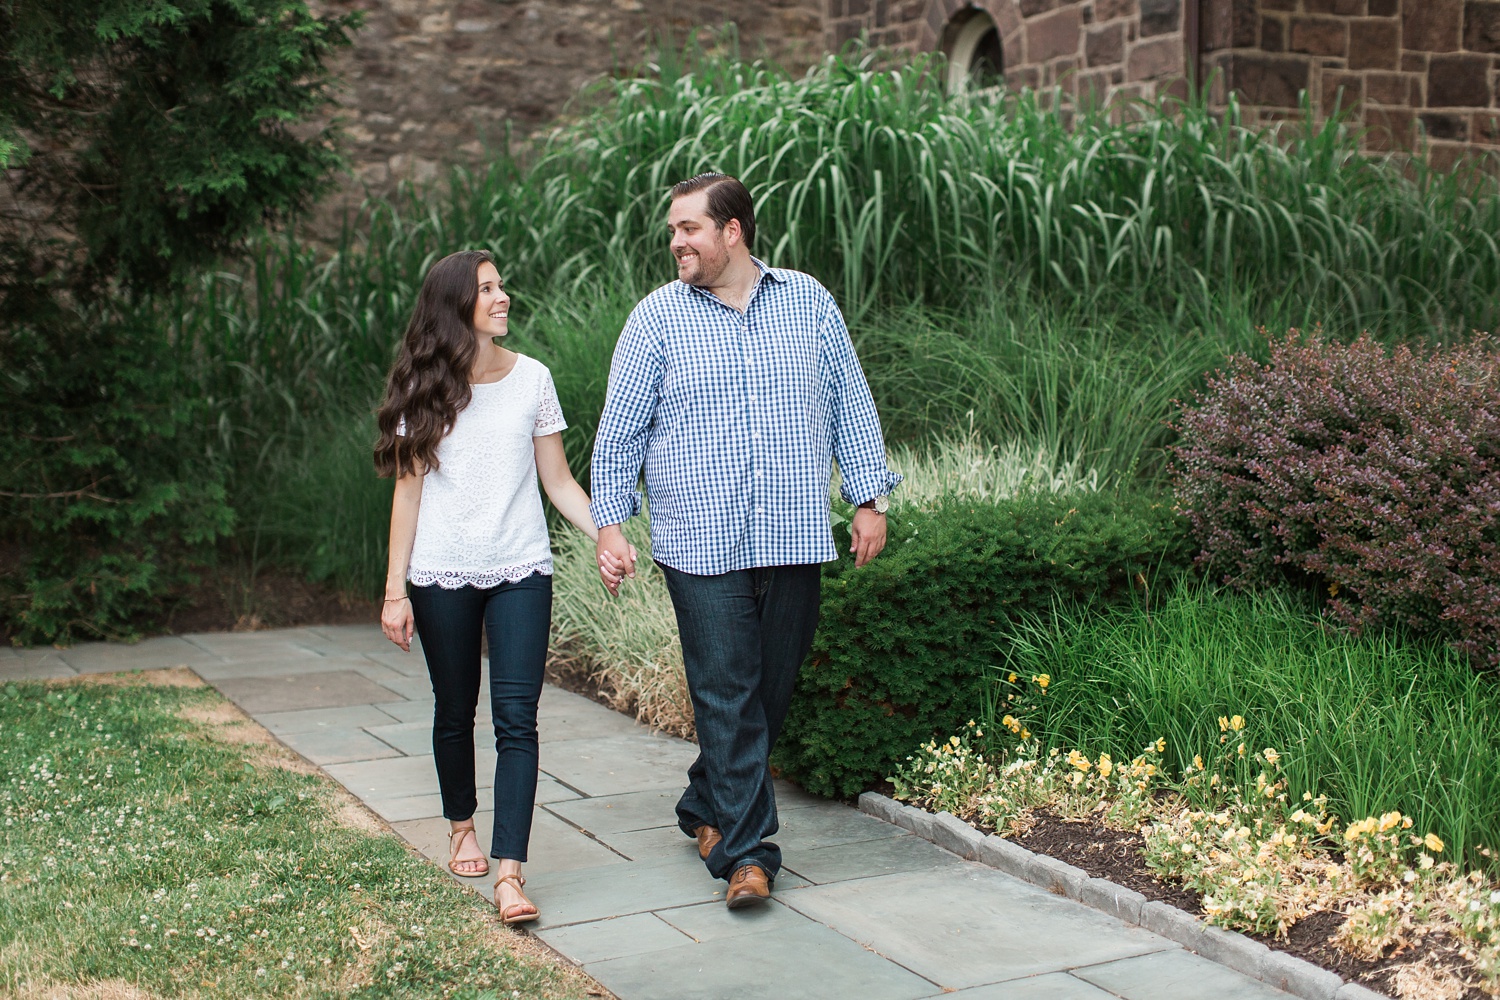 Doylestown Engagement Session | Small Town Engagement | Meaghan and Brian